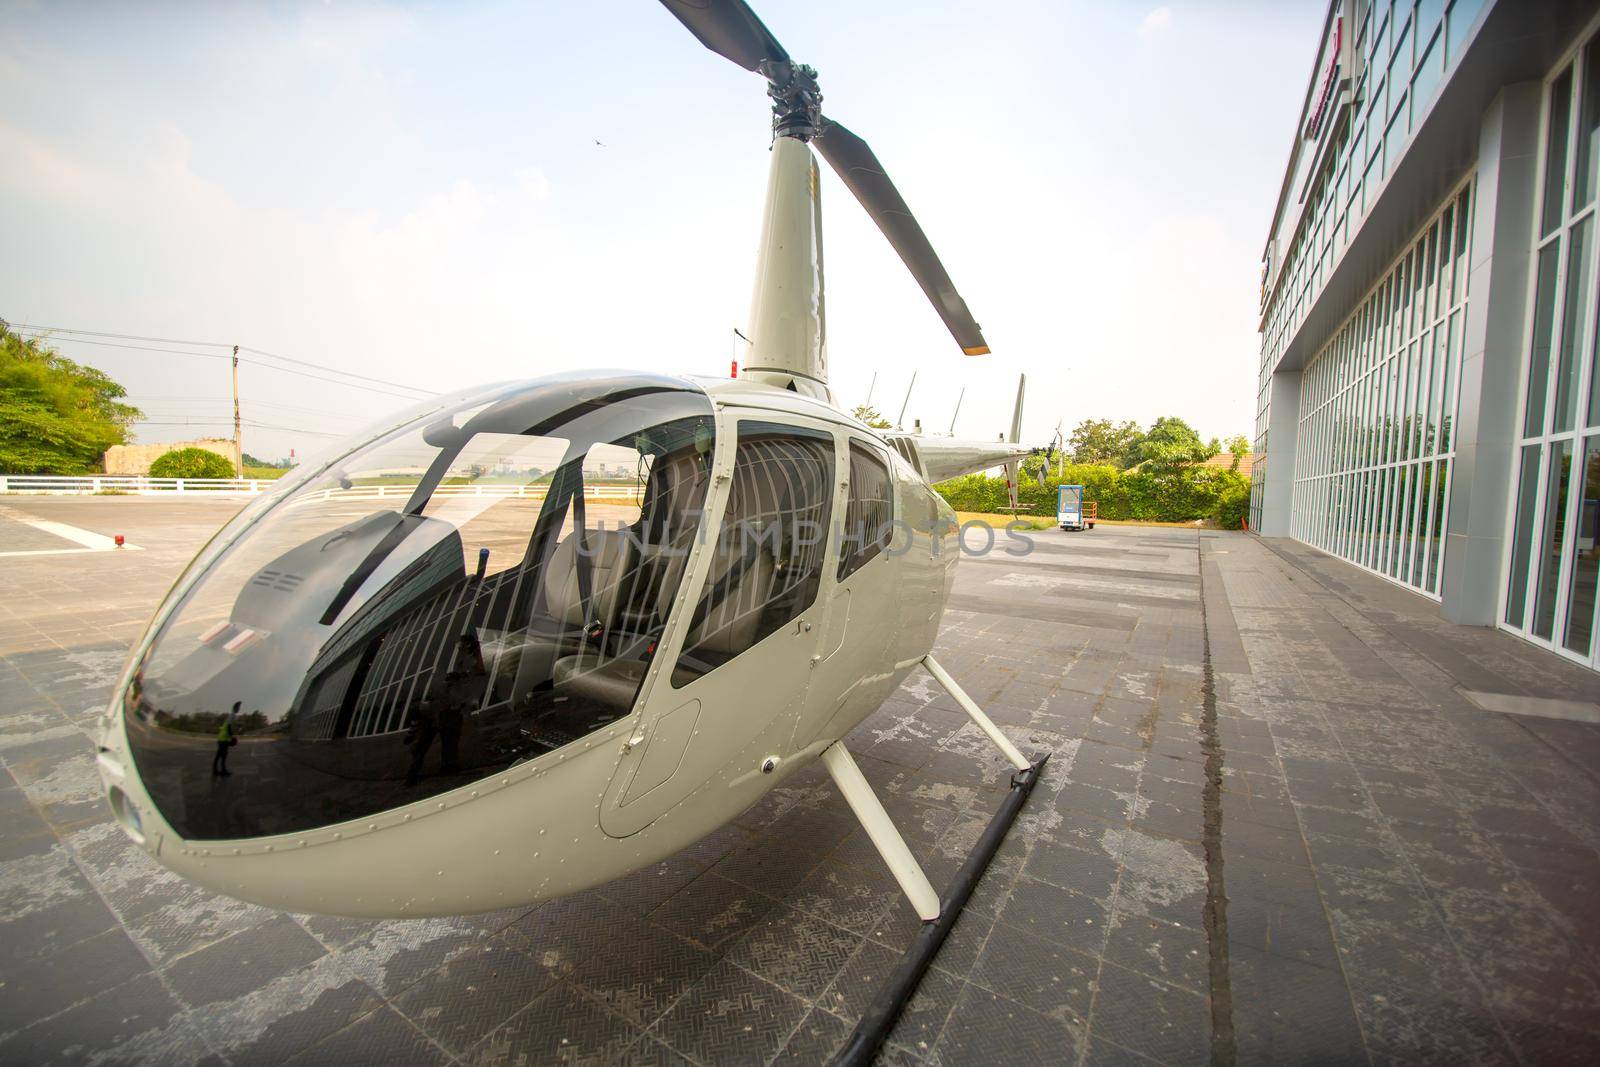 private commercial Helicopter parking by airport terminal by chuanchai